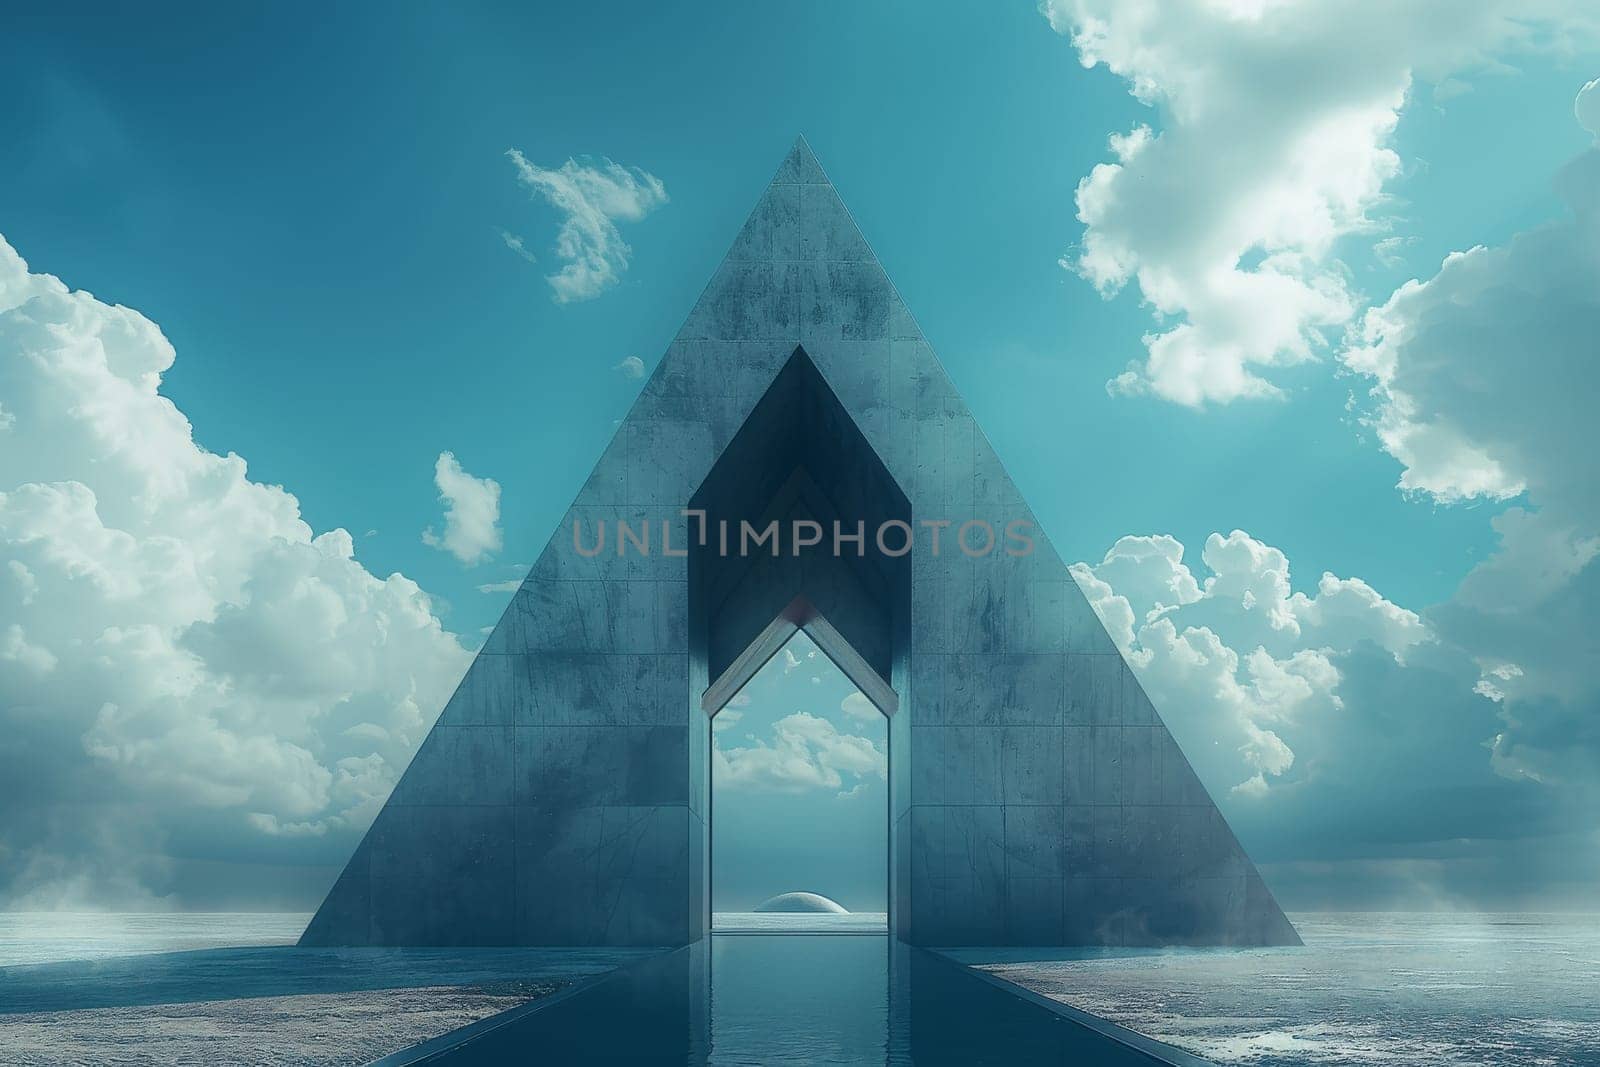 A large geometric with a triangular entrance is surrounded by a cloudy sky. The image has a mysterious and intriguing mood, as the pyramid seems to be a gateway to another world or dimension